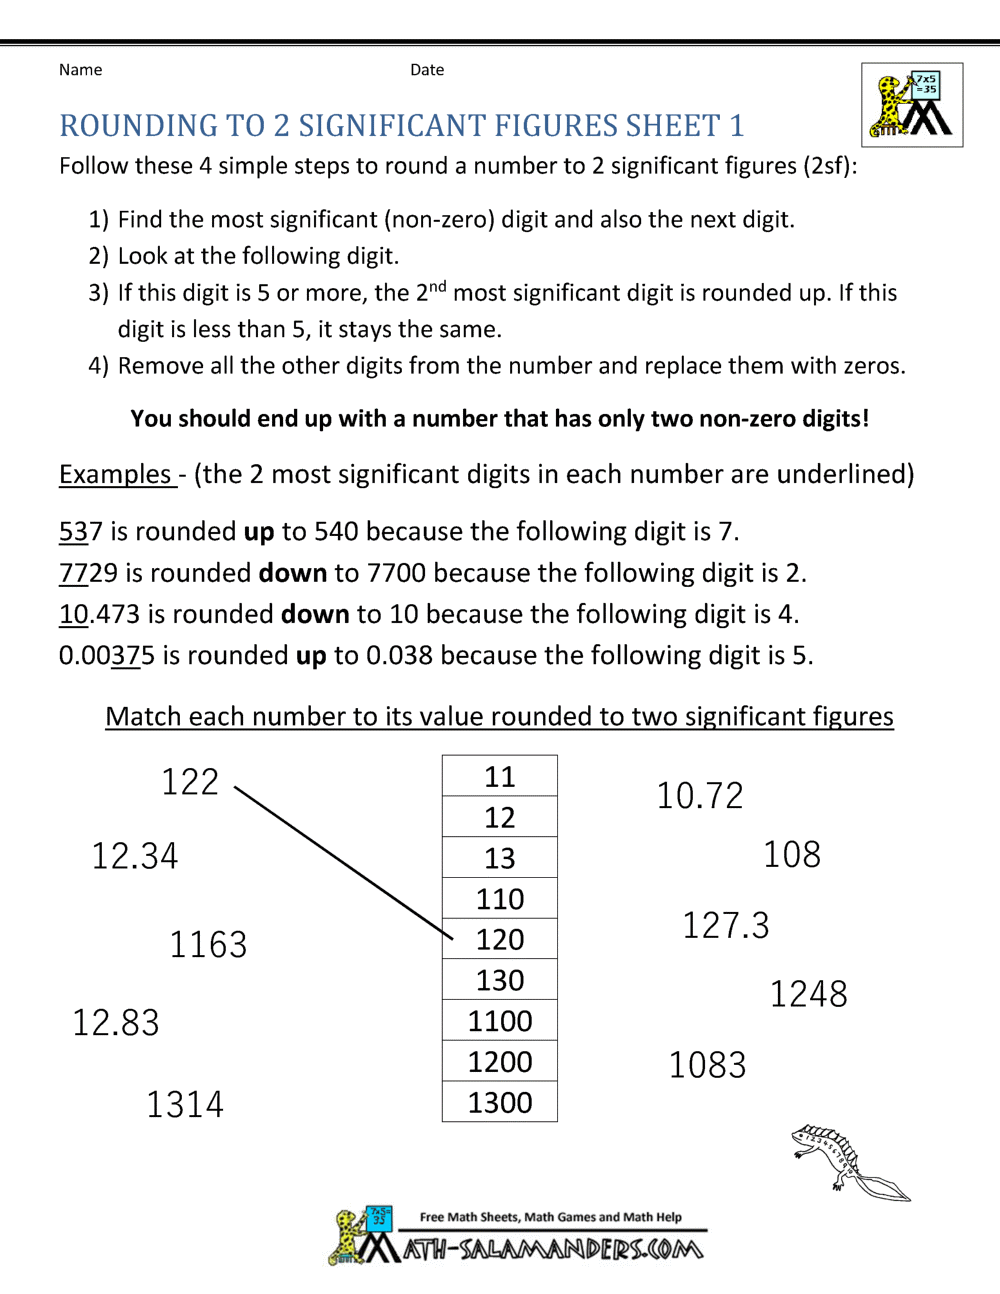 Rounding Significant Figures Intended For Significant Figures Practice Worksheet